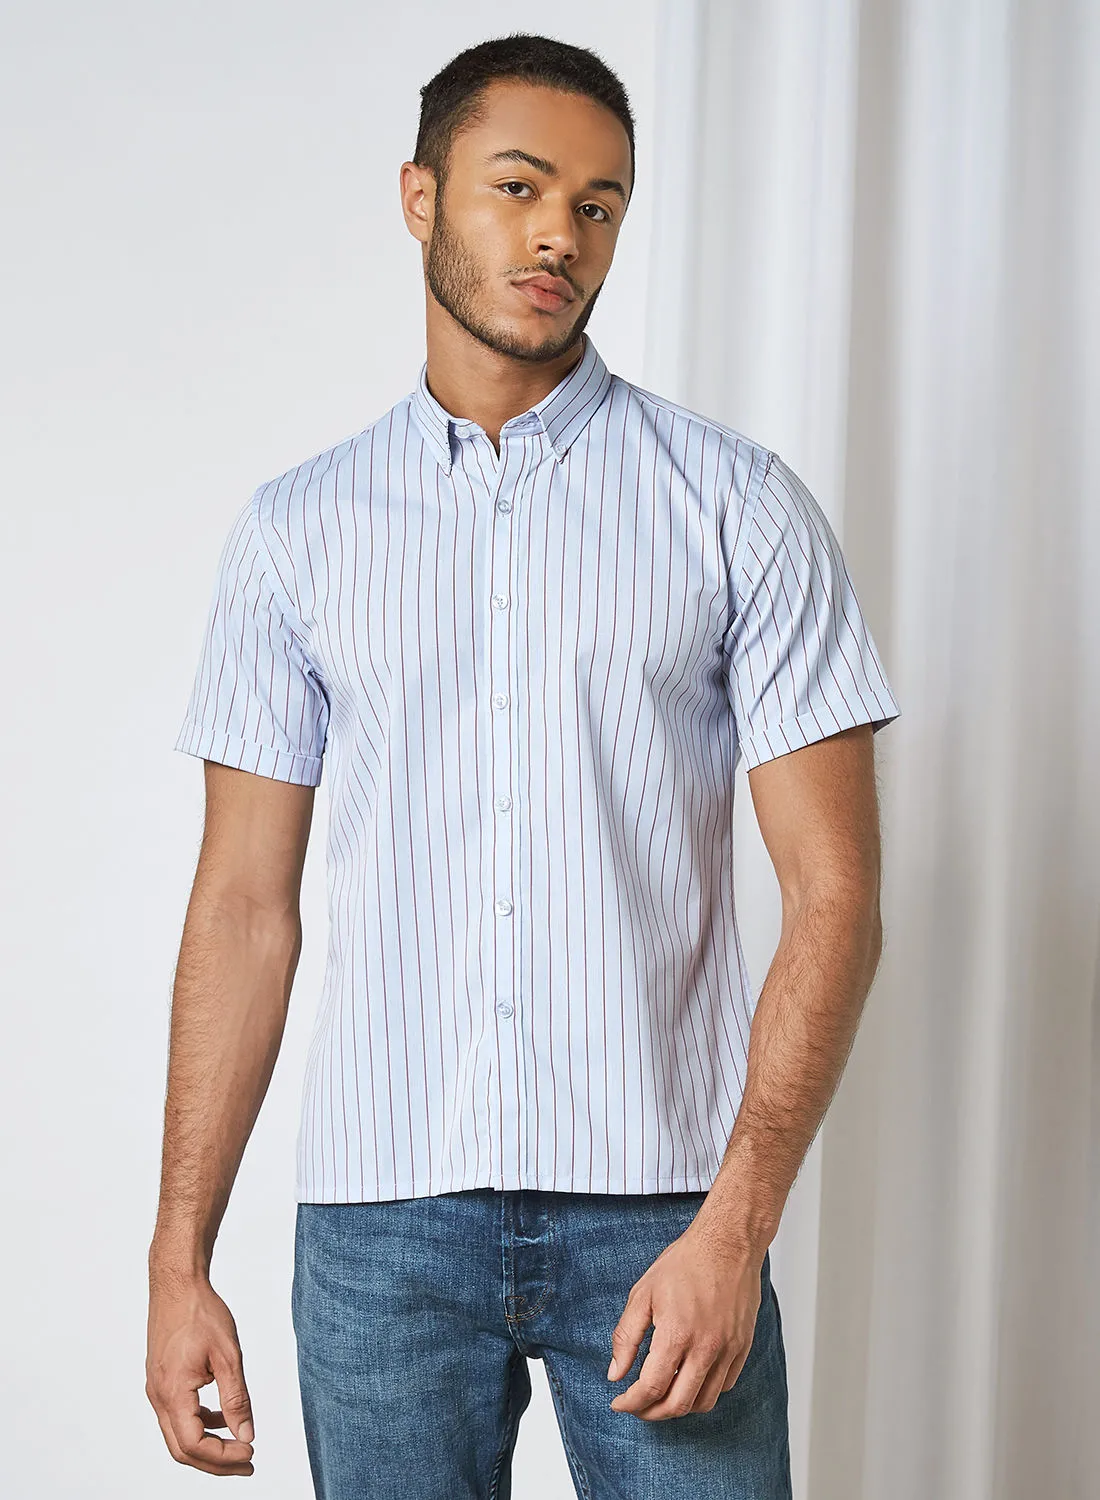 STATE 8 Solid Short Sleeve Shirt Striped